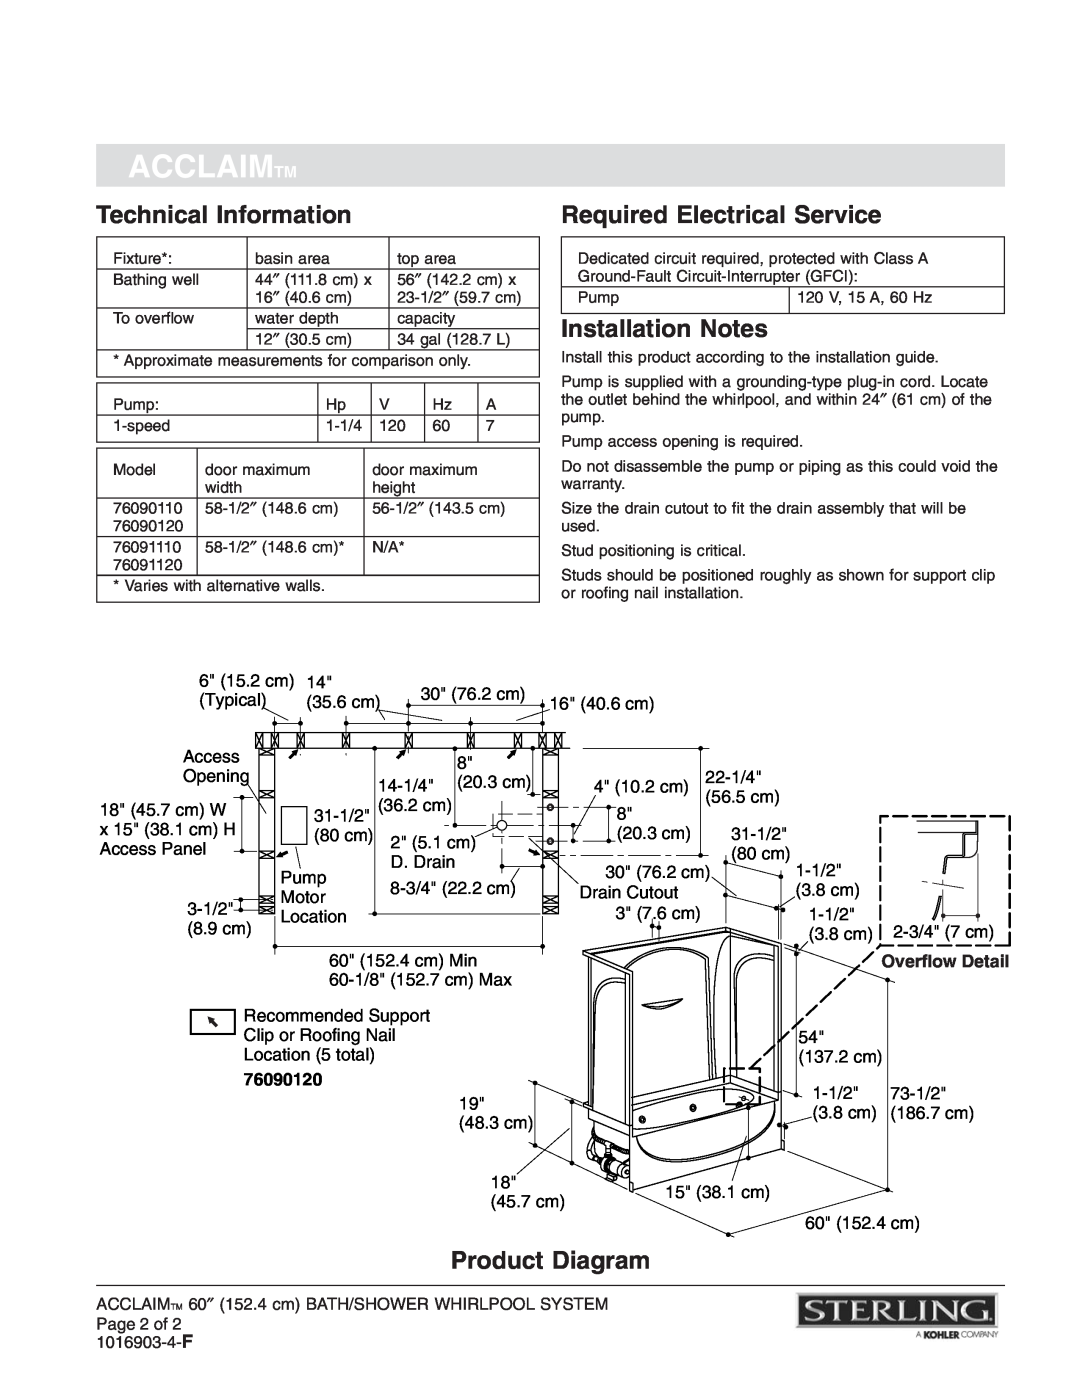 Sterling Plumbing 76090120 warranty Technical Information, Required Electrical Service, Installation Notes, Product Diagram 